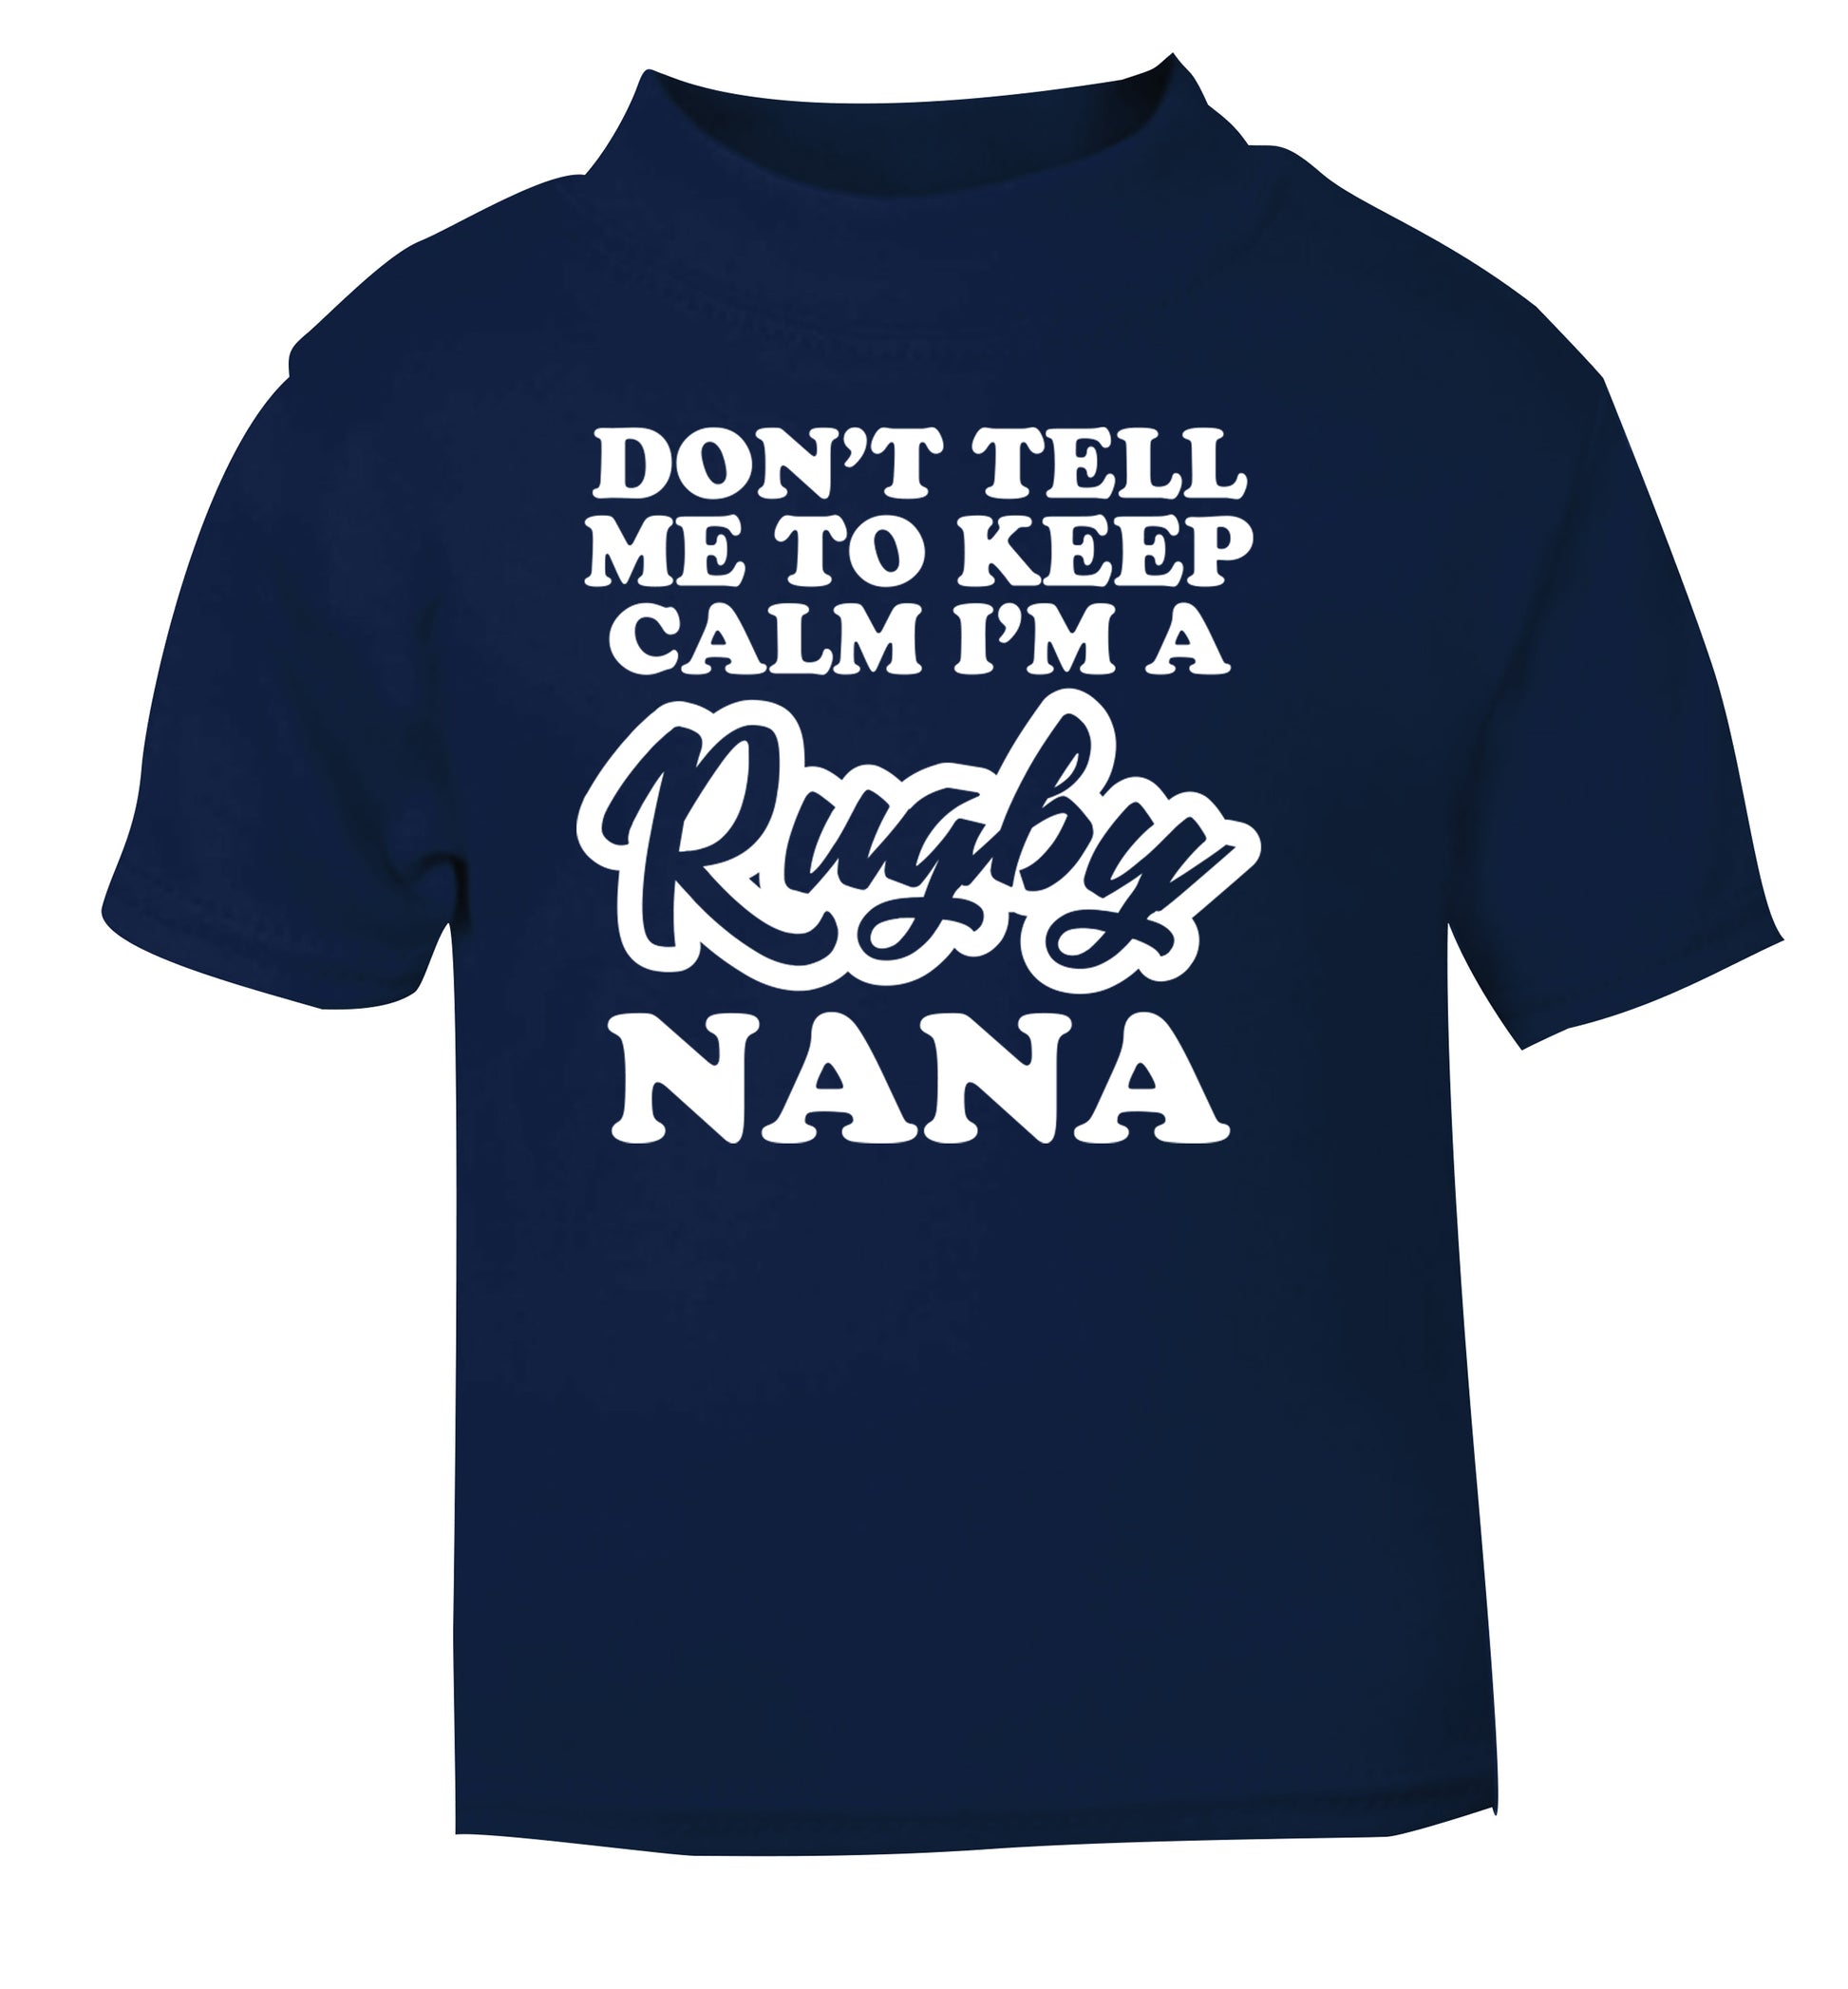 Don't tell me to keep calm I'm a rugby nana navy Baby Toddler Tshirt 2 Years